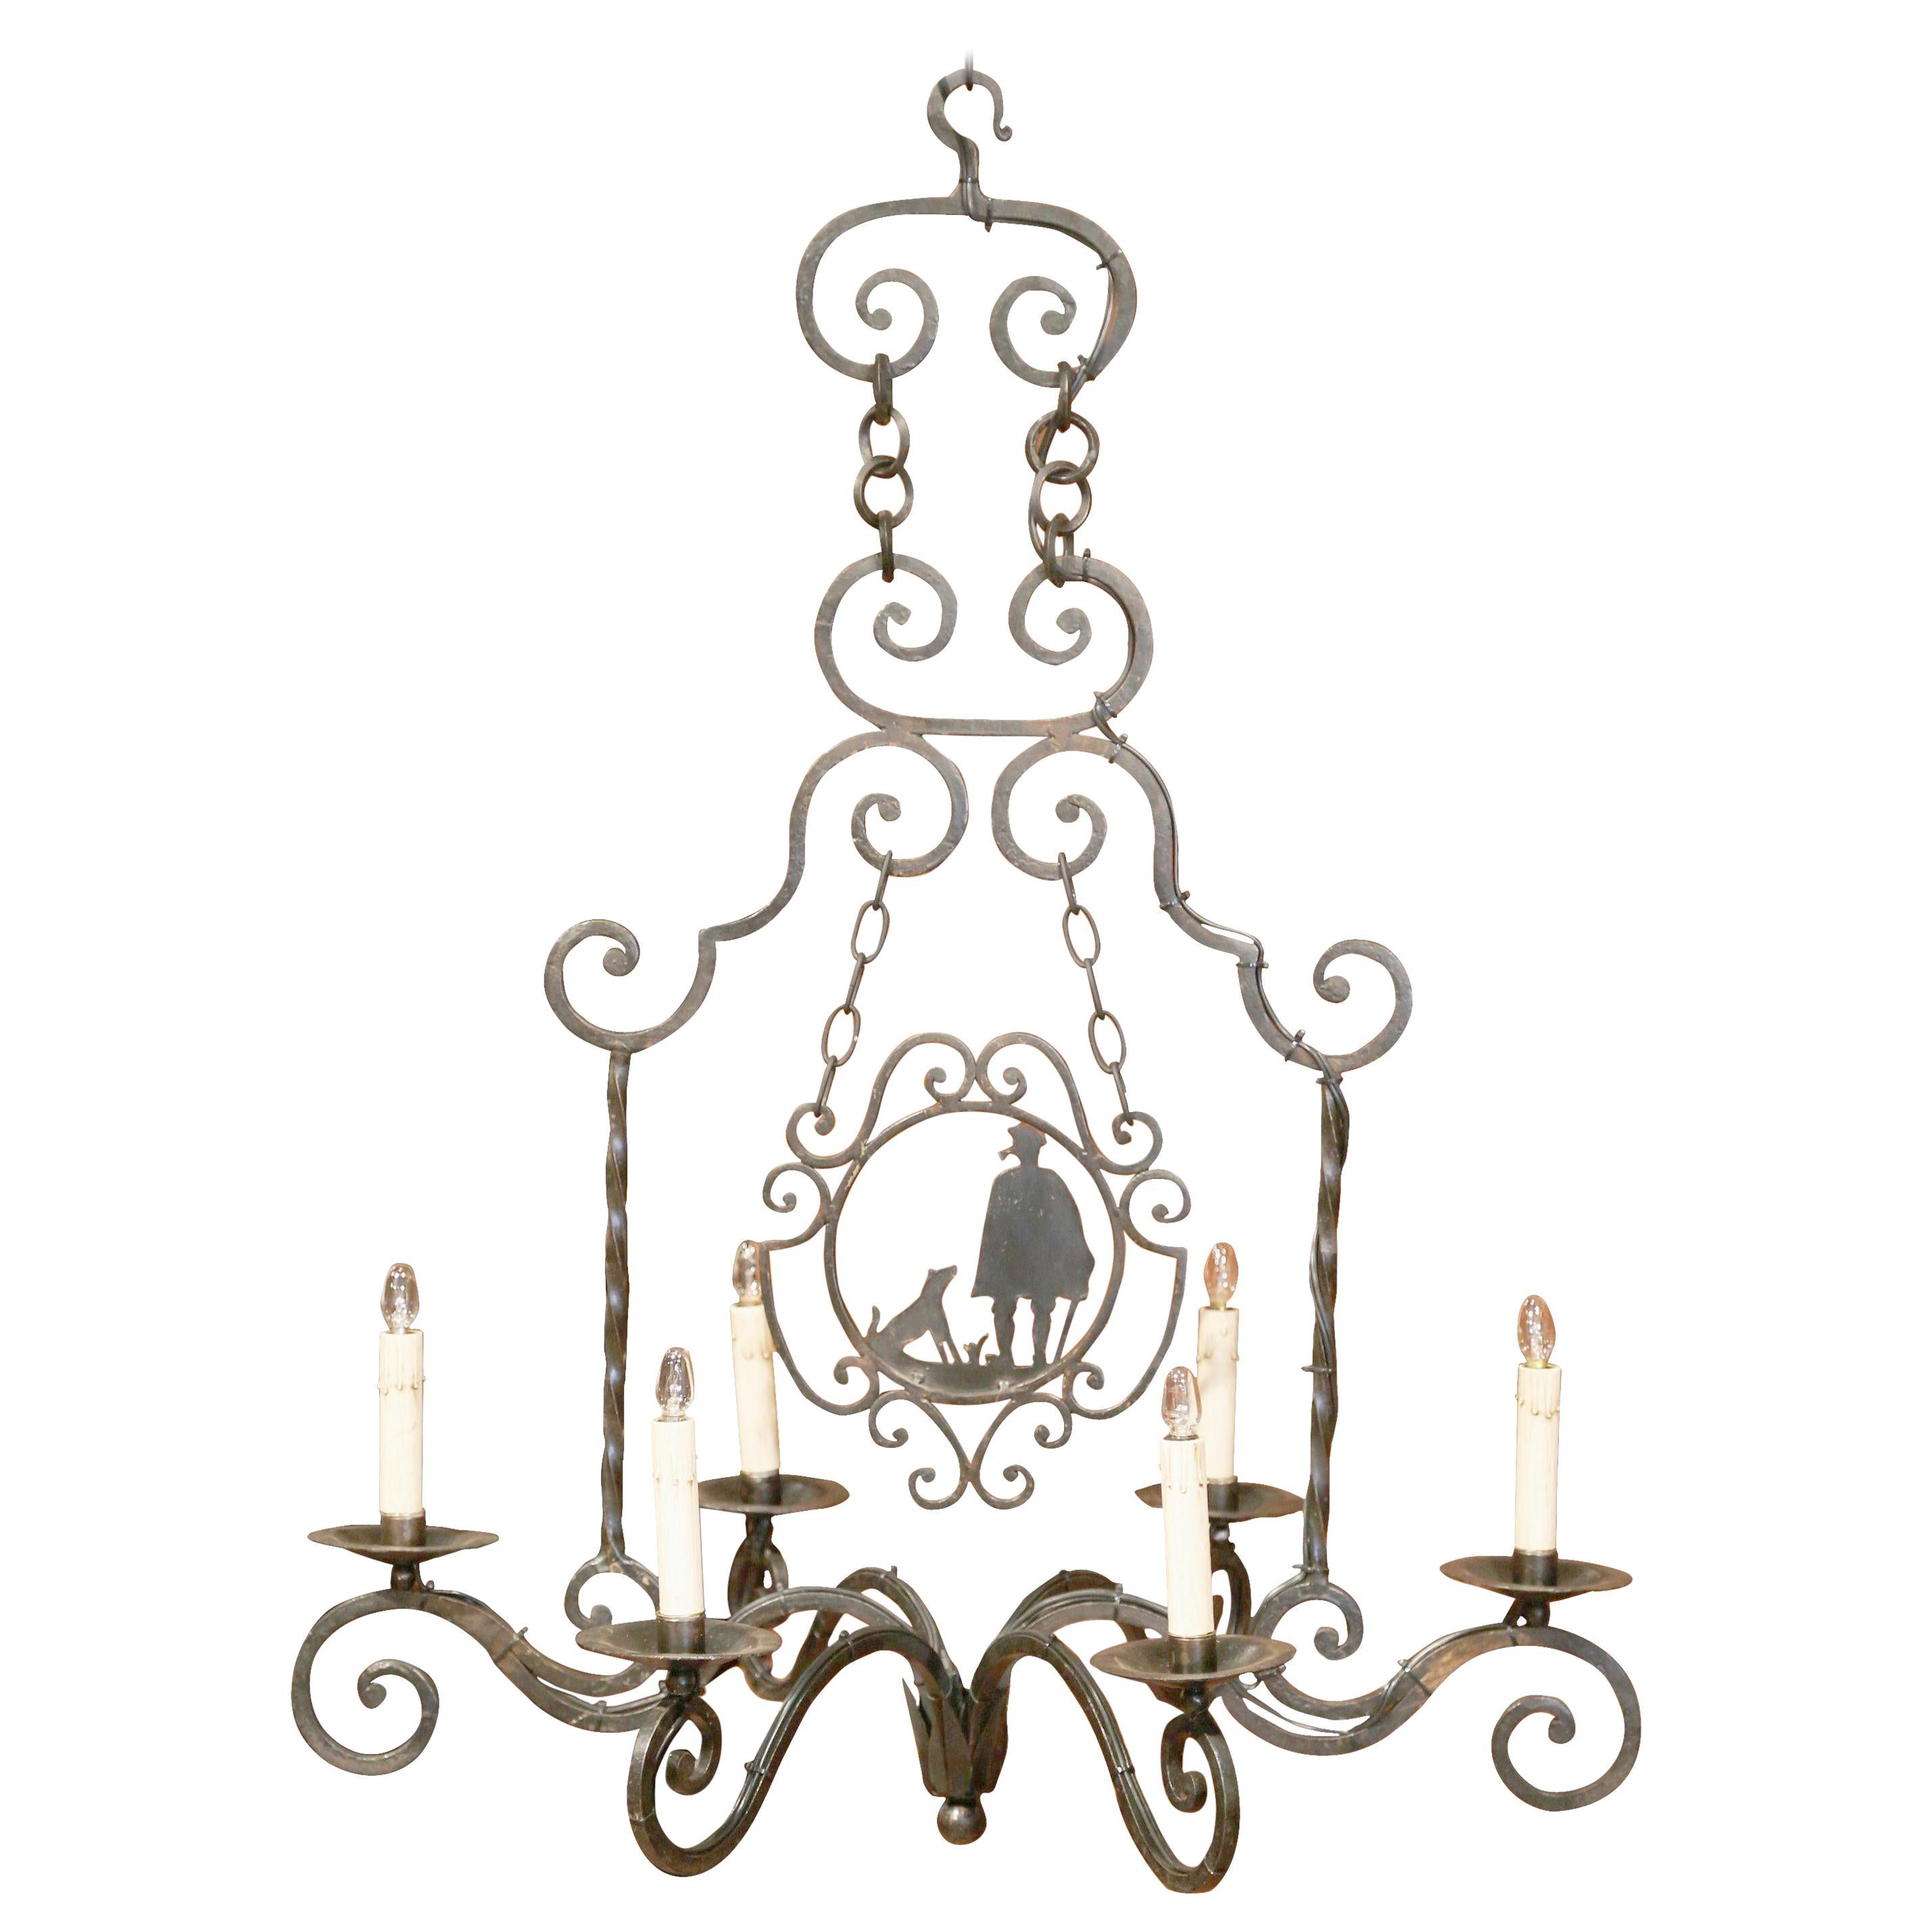 Early 20th Century French Iron Six-Light Chandelier with Shepherd and Dog